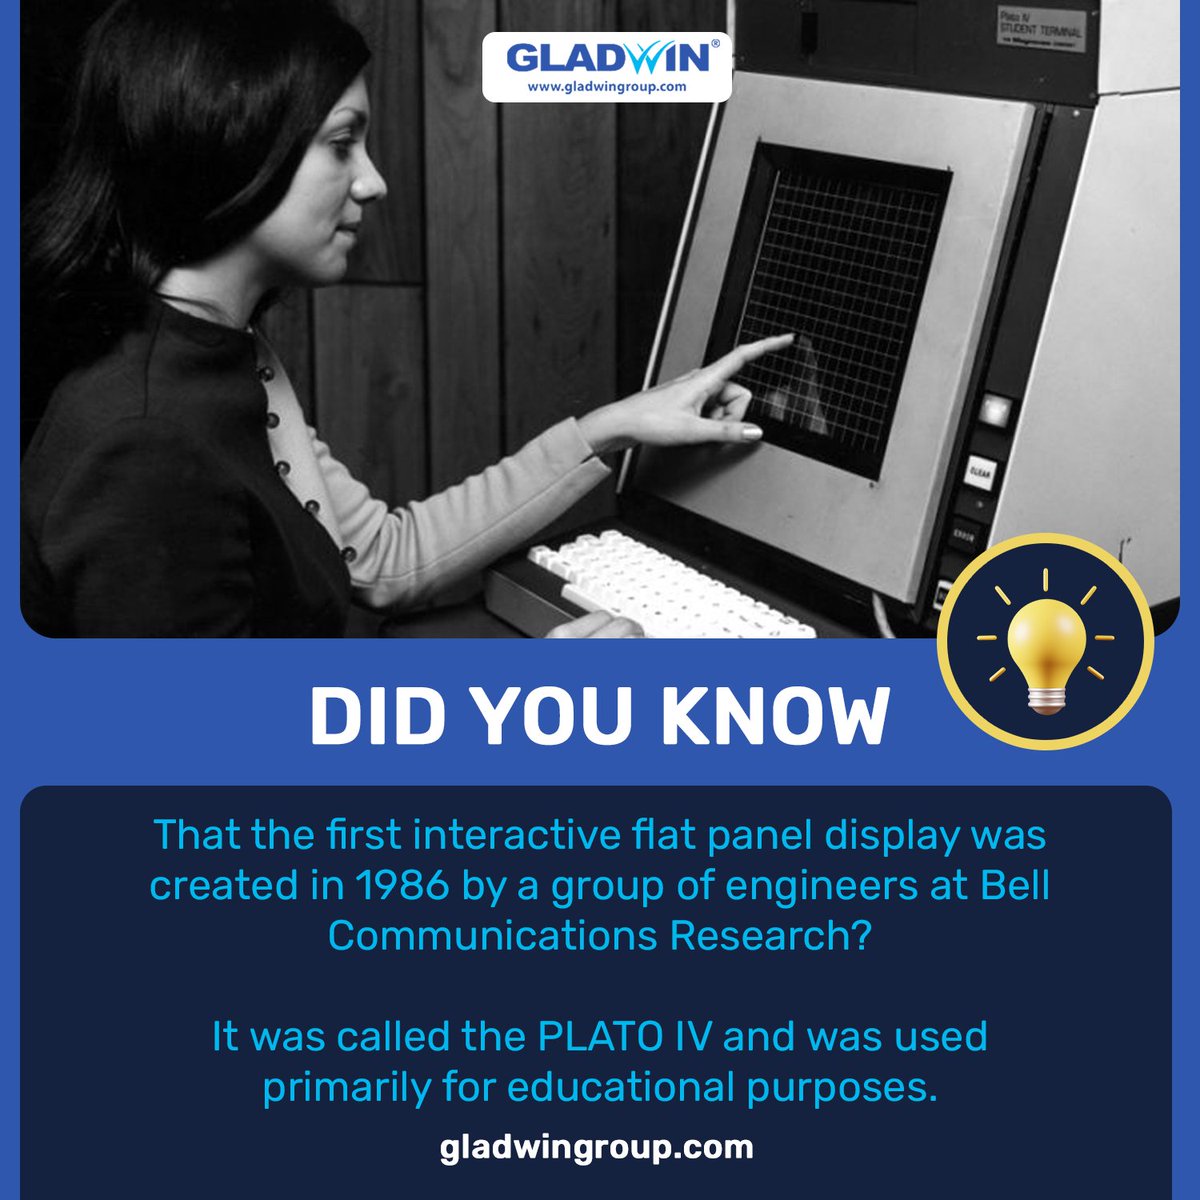 Fast forward to today, and Gladwin Group stands at the forefront of this technological evolution, leading the way in manufacturing interactive flat panel displays. 

#interactive #technology #education #innovation #flatpaneldisplay #GladwinGroup #PLATOIV #interactivelearning